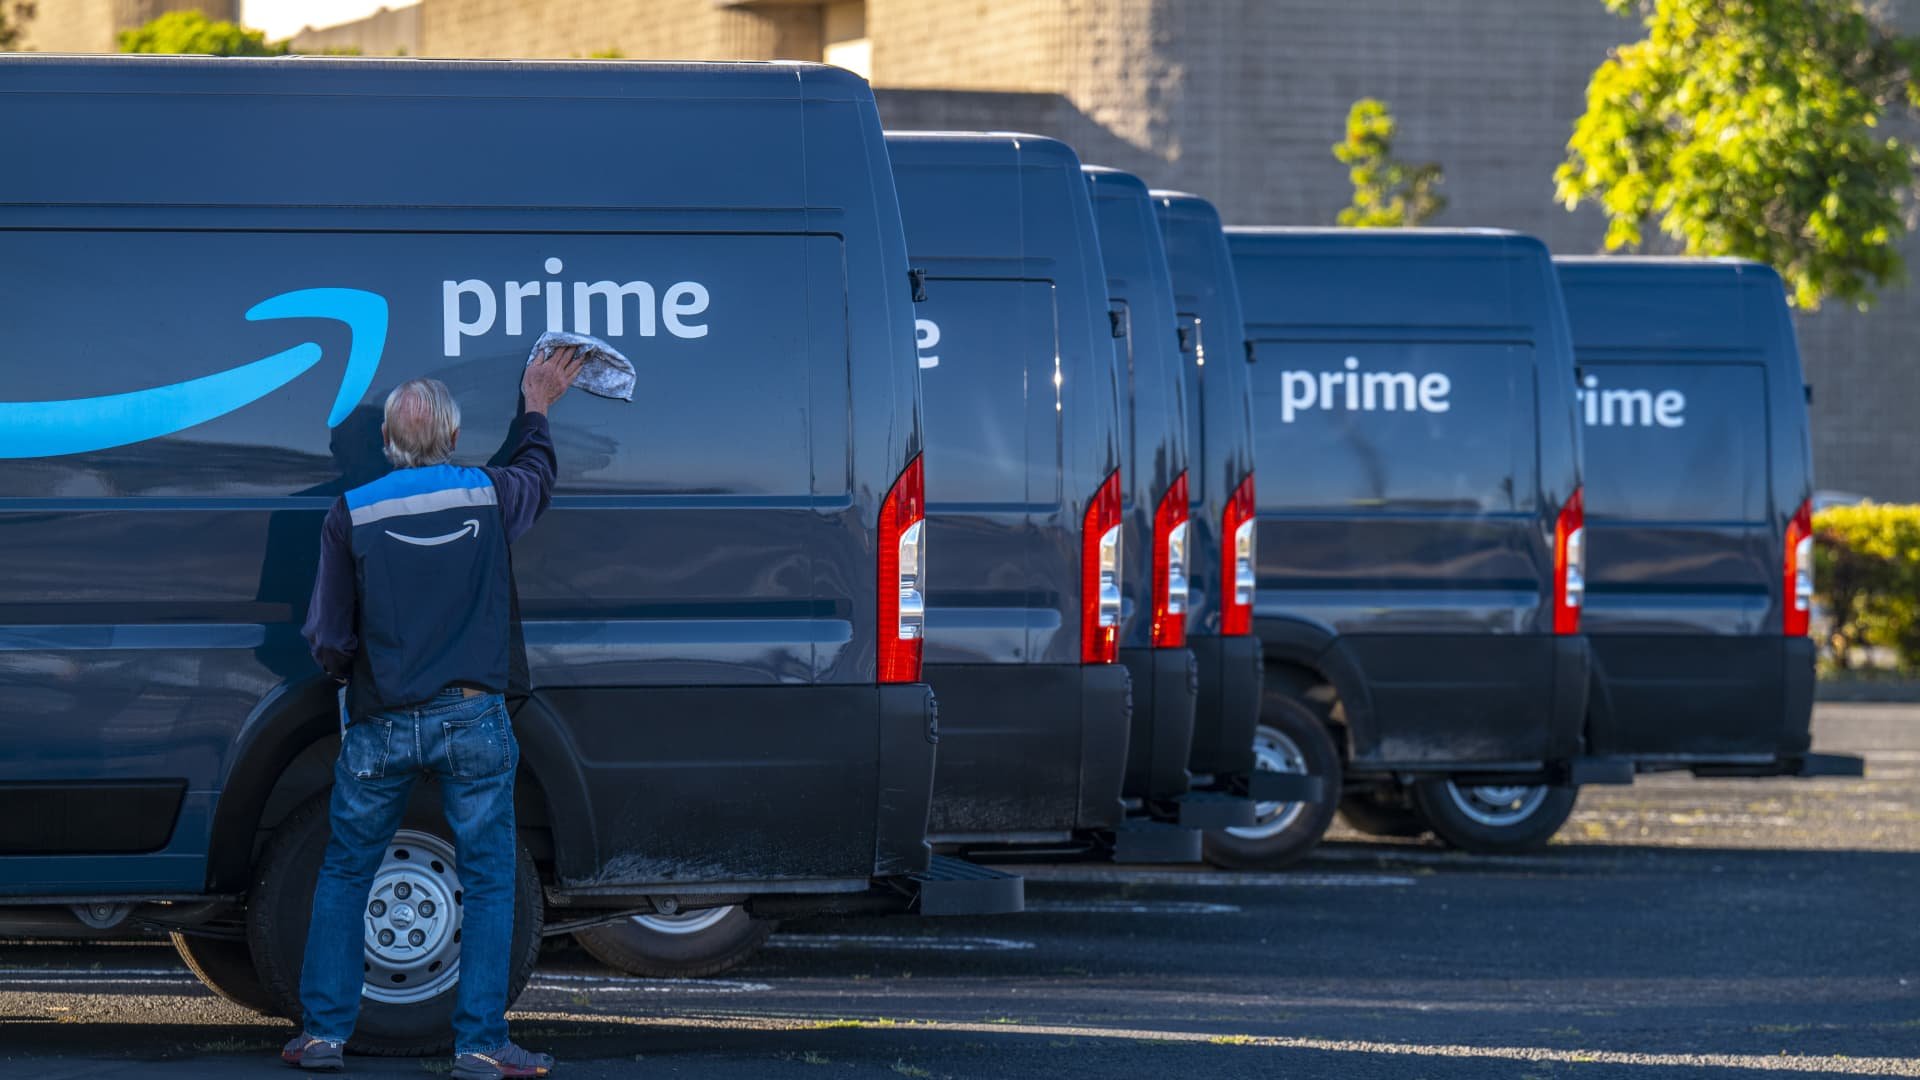 Amazon plans two Prime shopping events this year, with second one in Q4